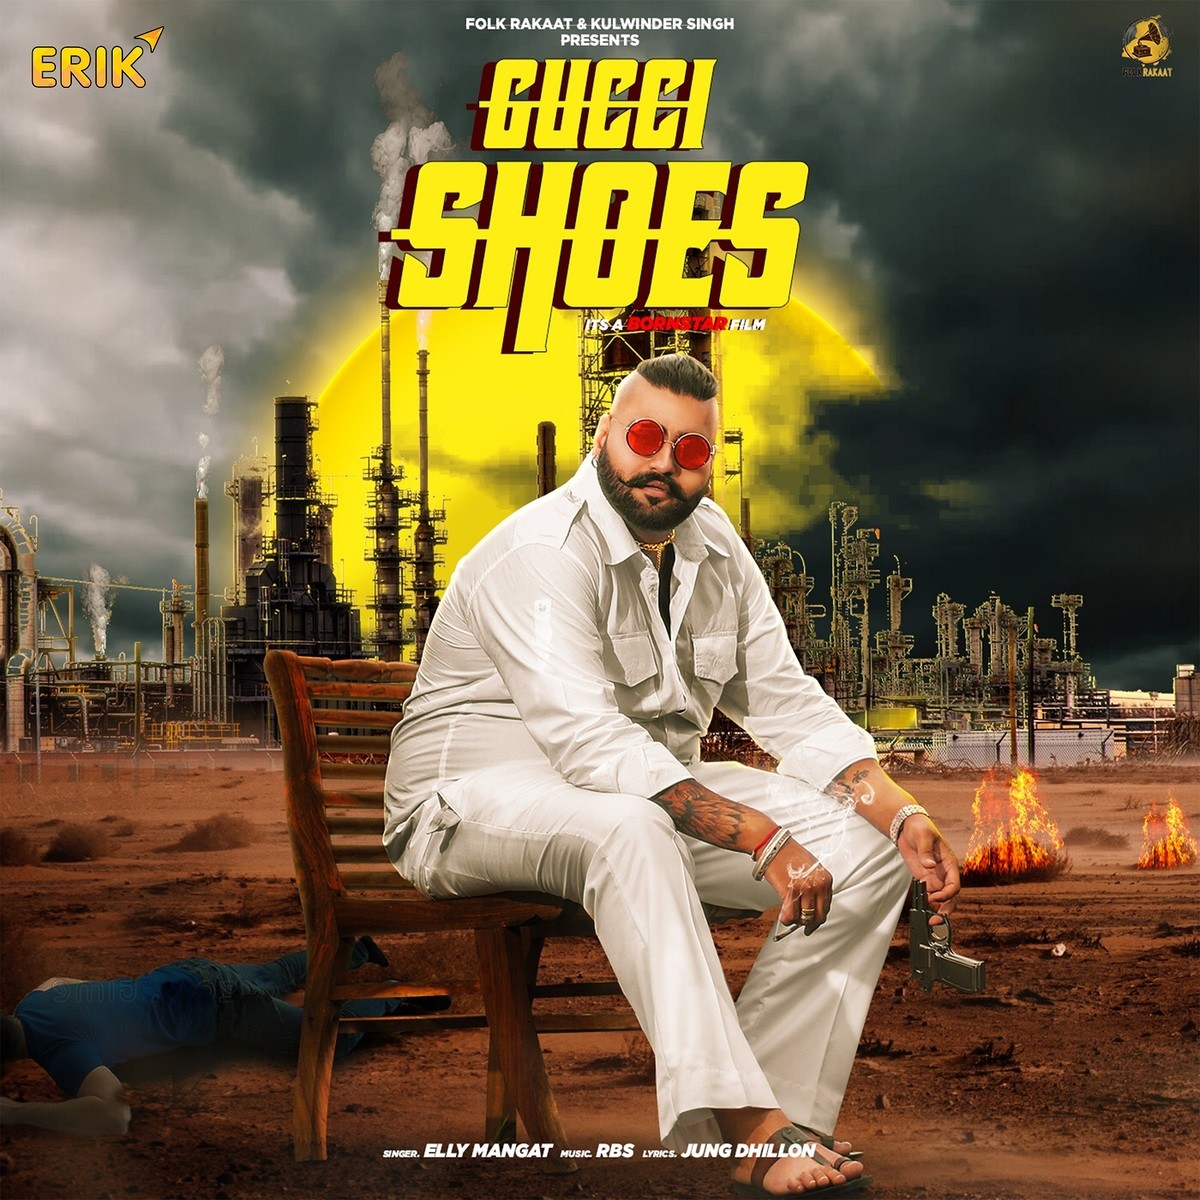 gucci shoes song